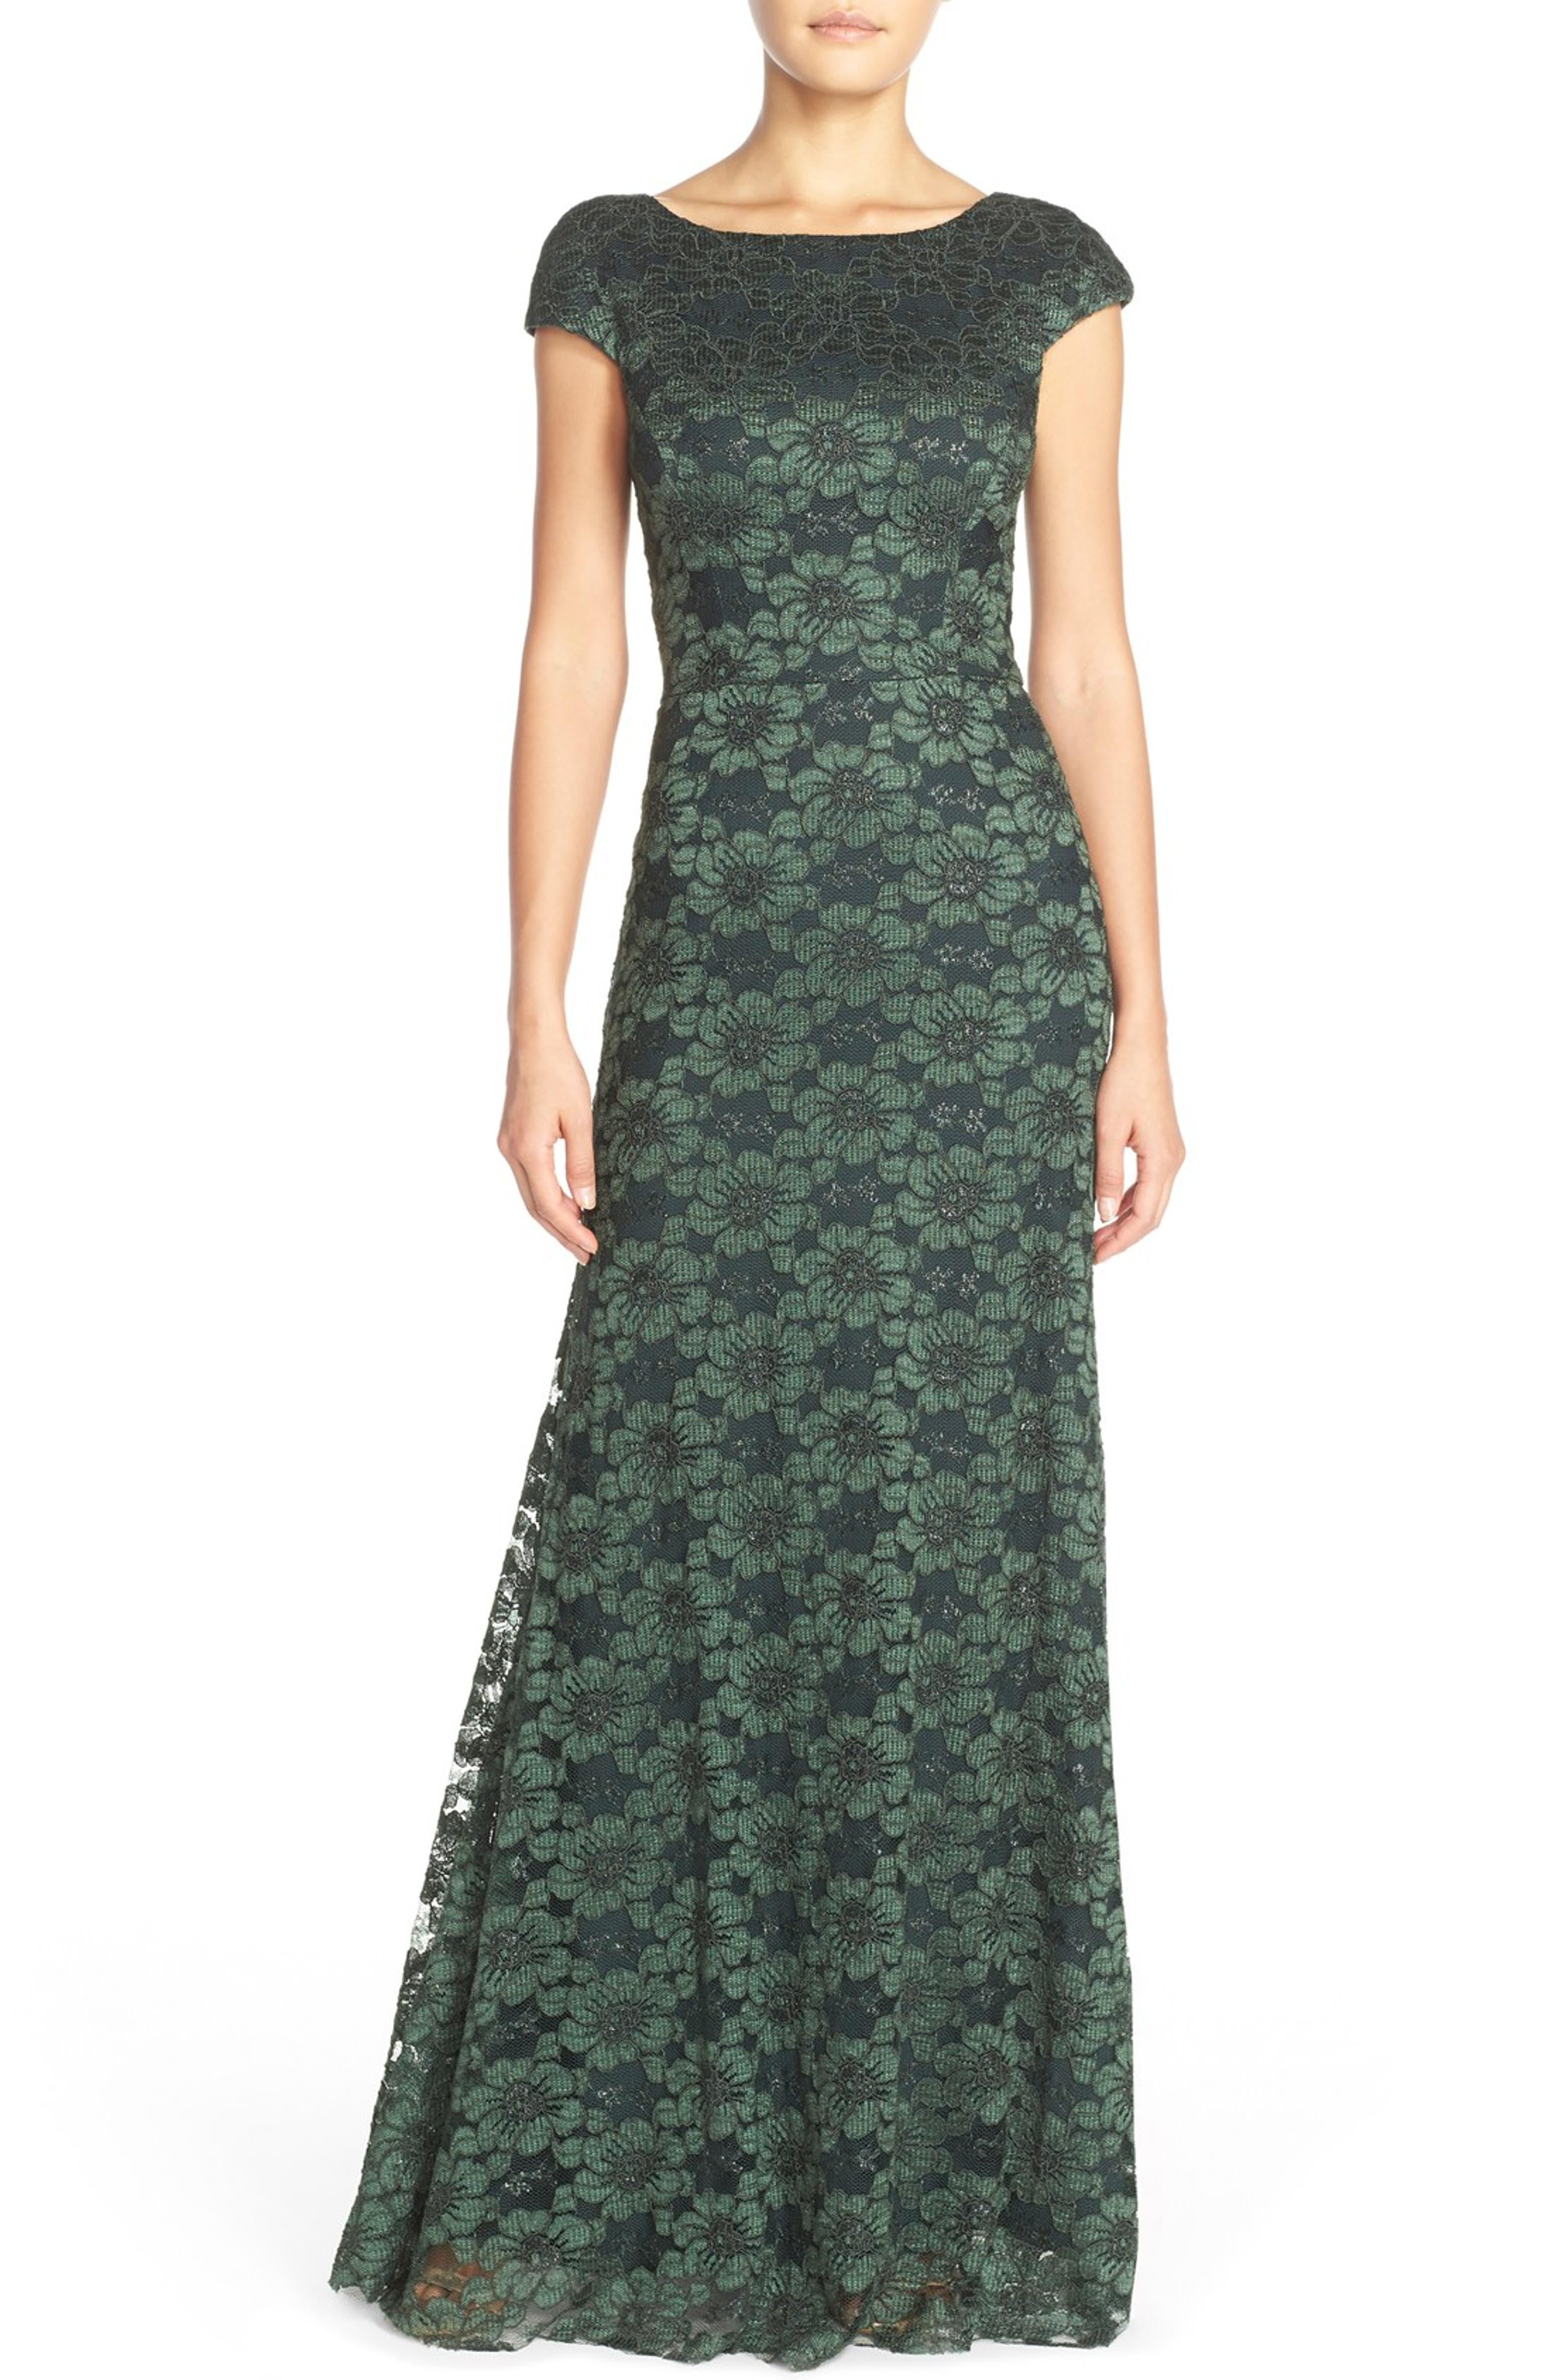 Vera Wang Corded Metallic Lace Fit & Flare Gown | Nordstrom